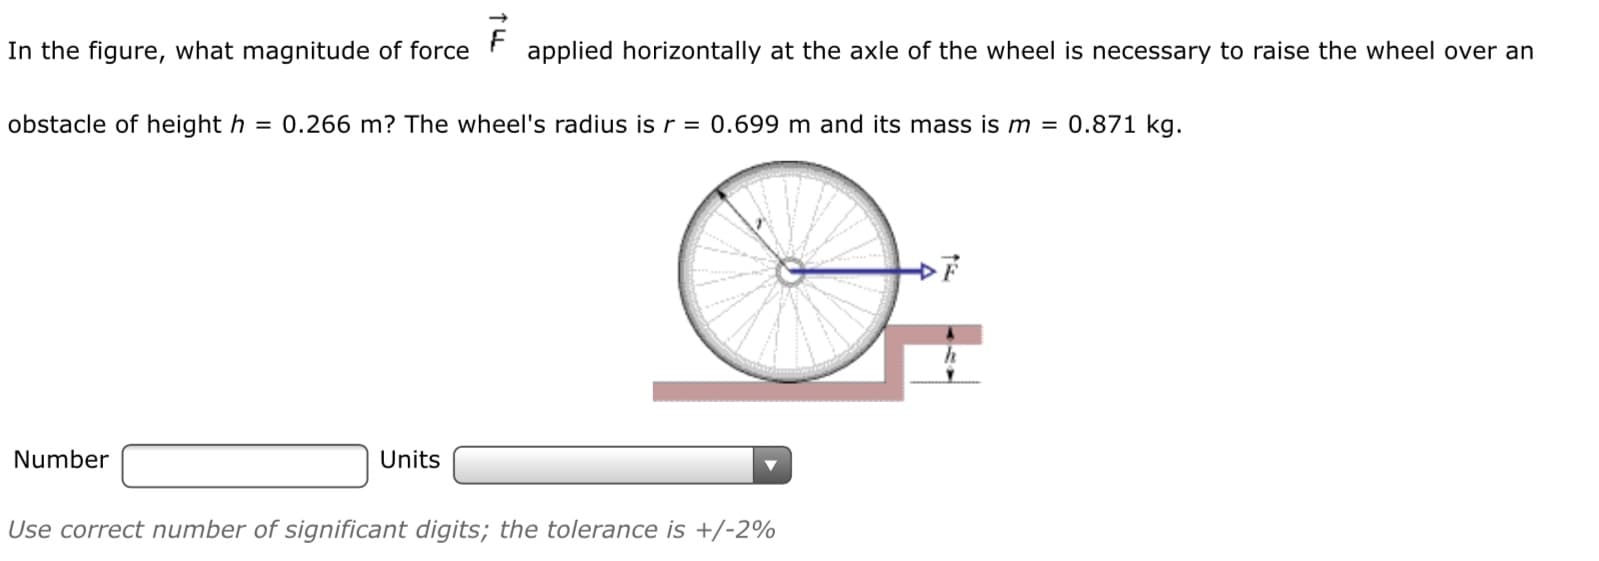 In the figure, what magnitude of force
applied horizontally at the axle of the wheel is necessary to raise the wheel over an
obstacle of height h = 0.266 m? The wheel's radius is r = 0.699 m and its mass is m = 0.871 kg.
Number
Units
Use correct number of significant digits; the tolerance is +/-2%
